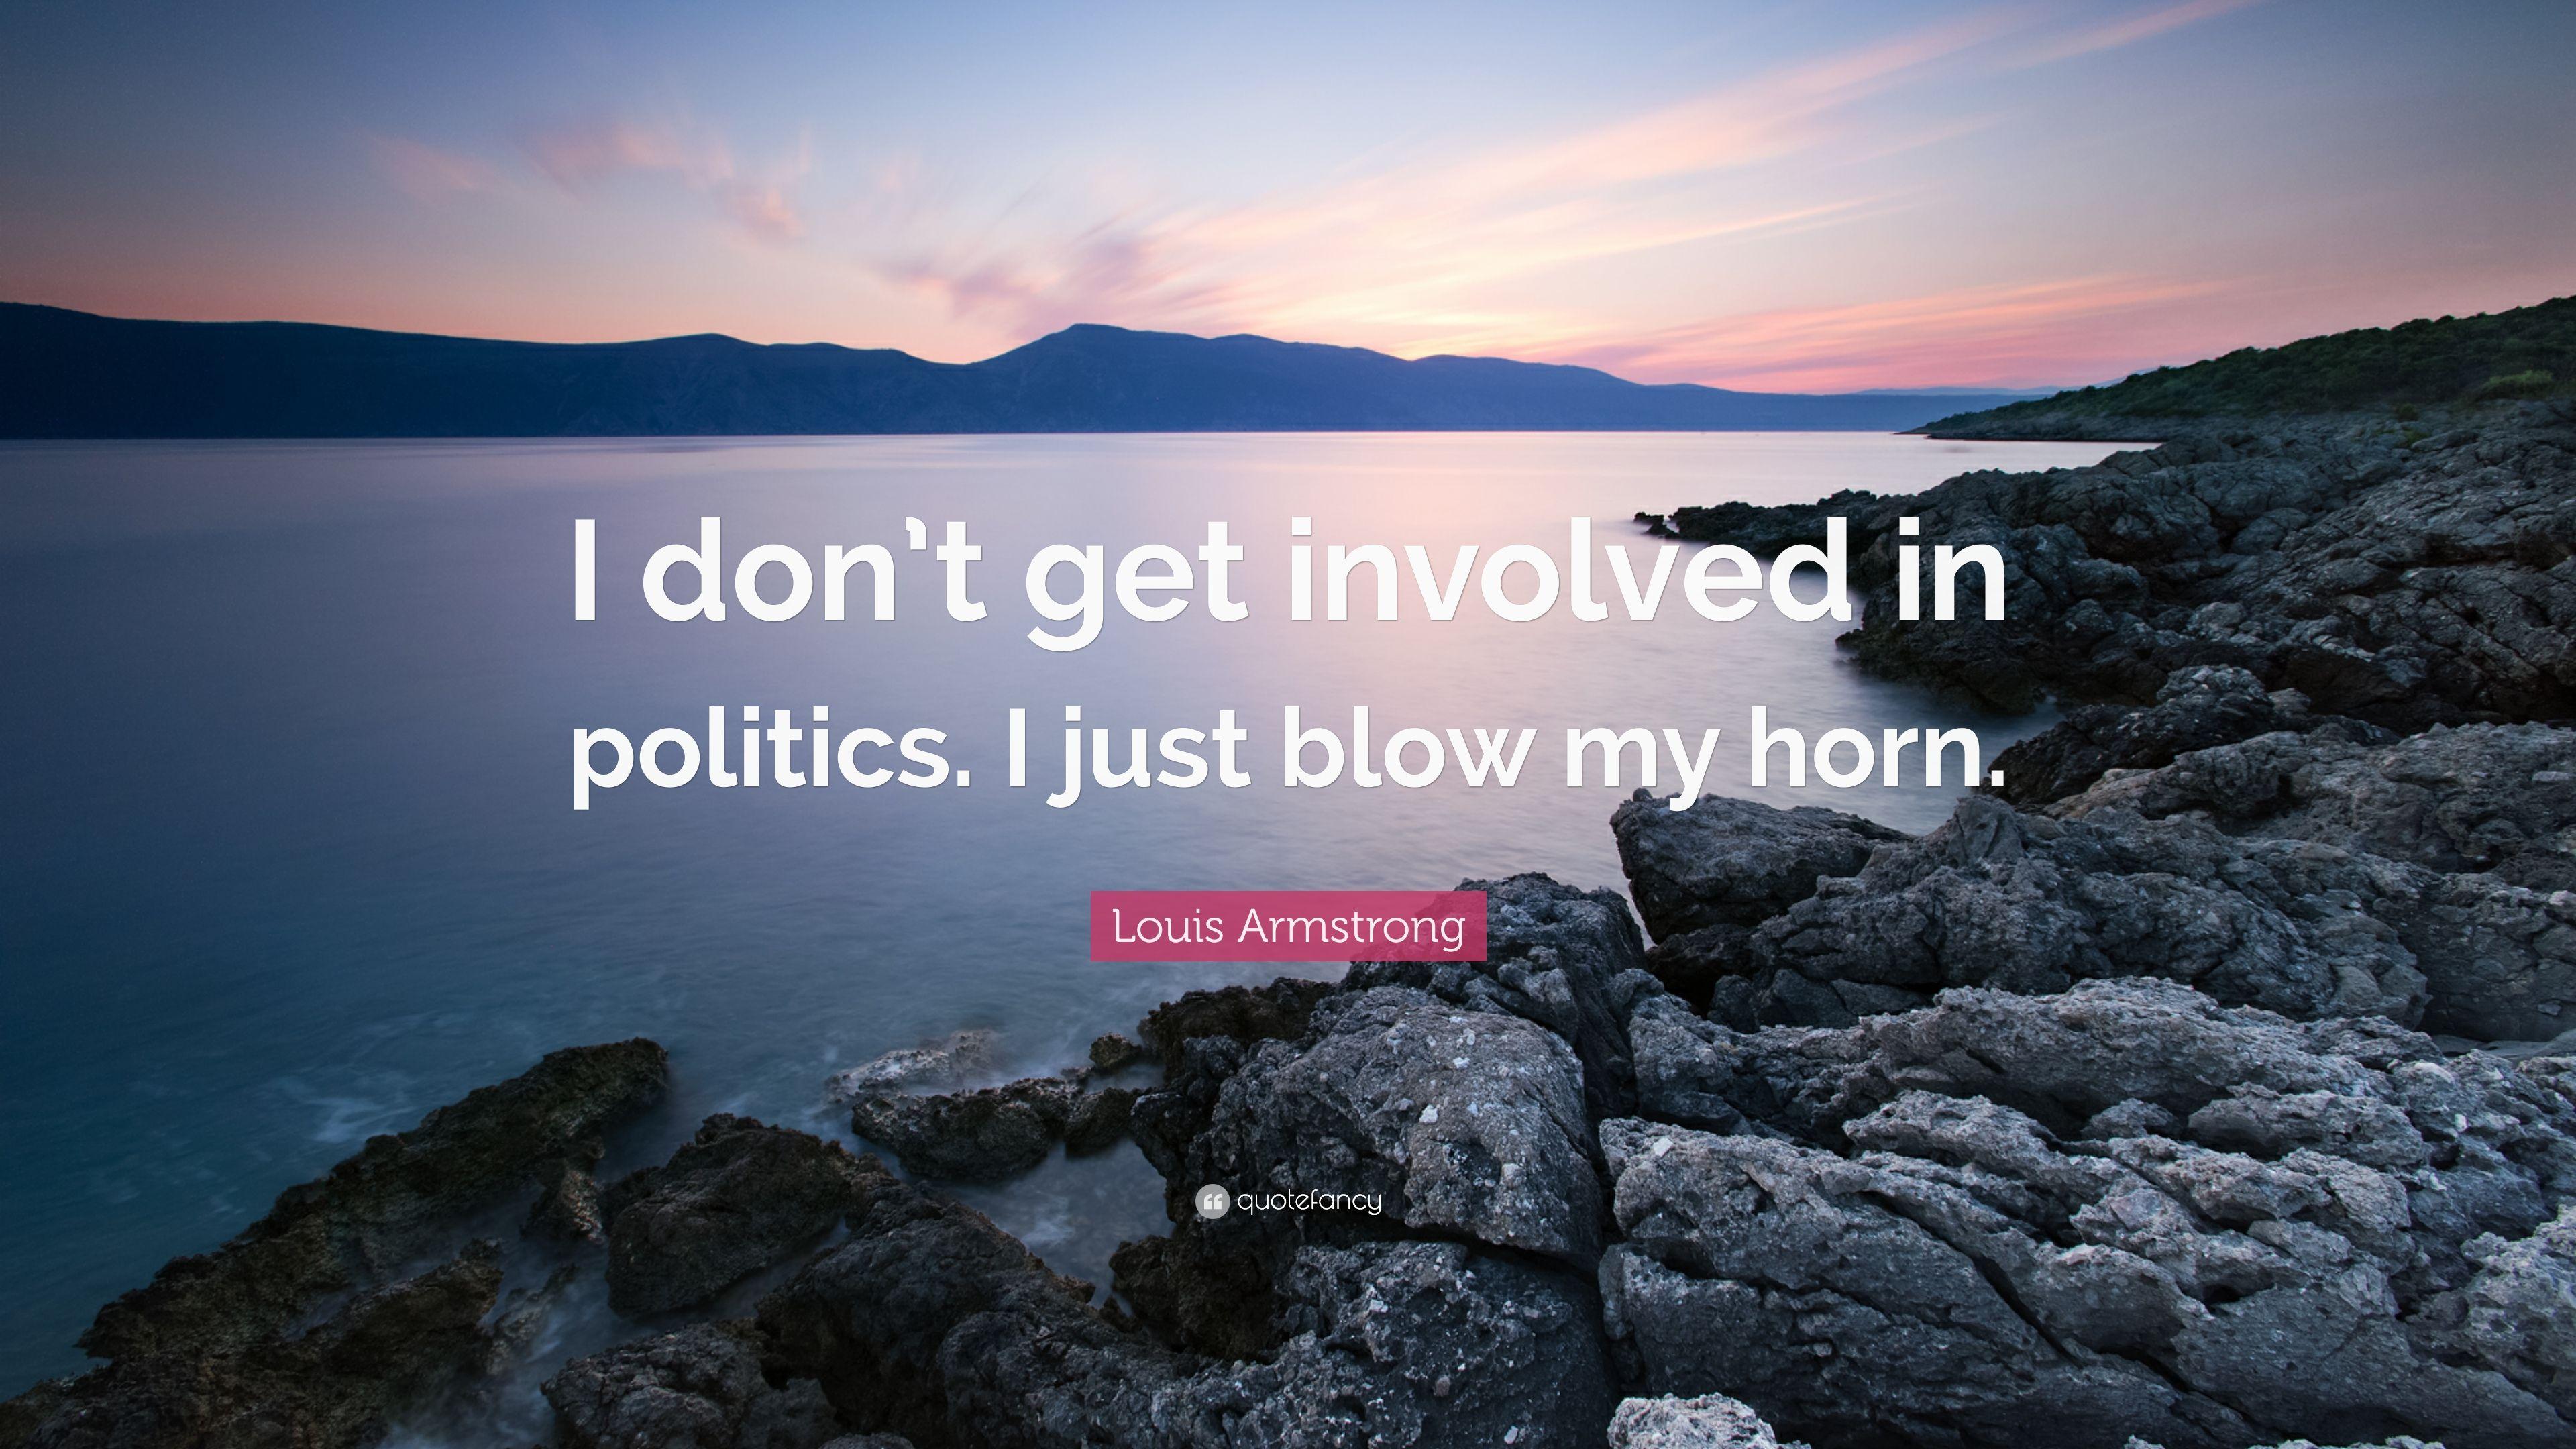 Louis Armstrong Quote: “I don't get involved in politics. I just